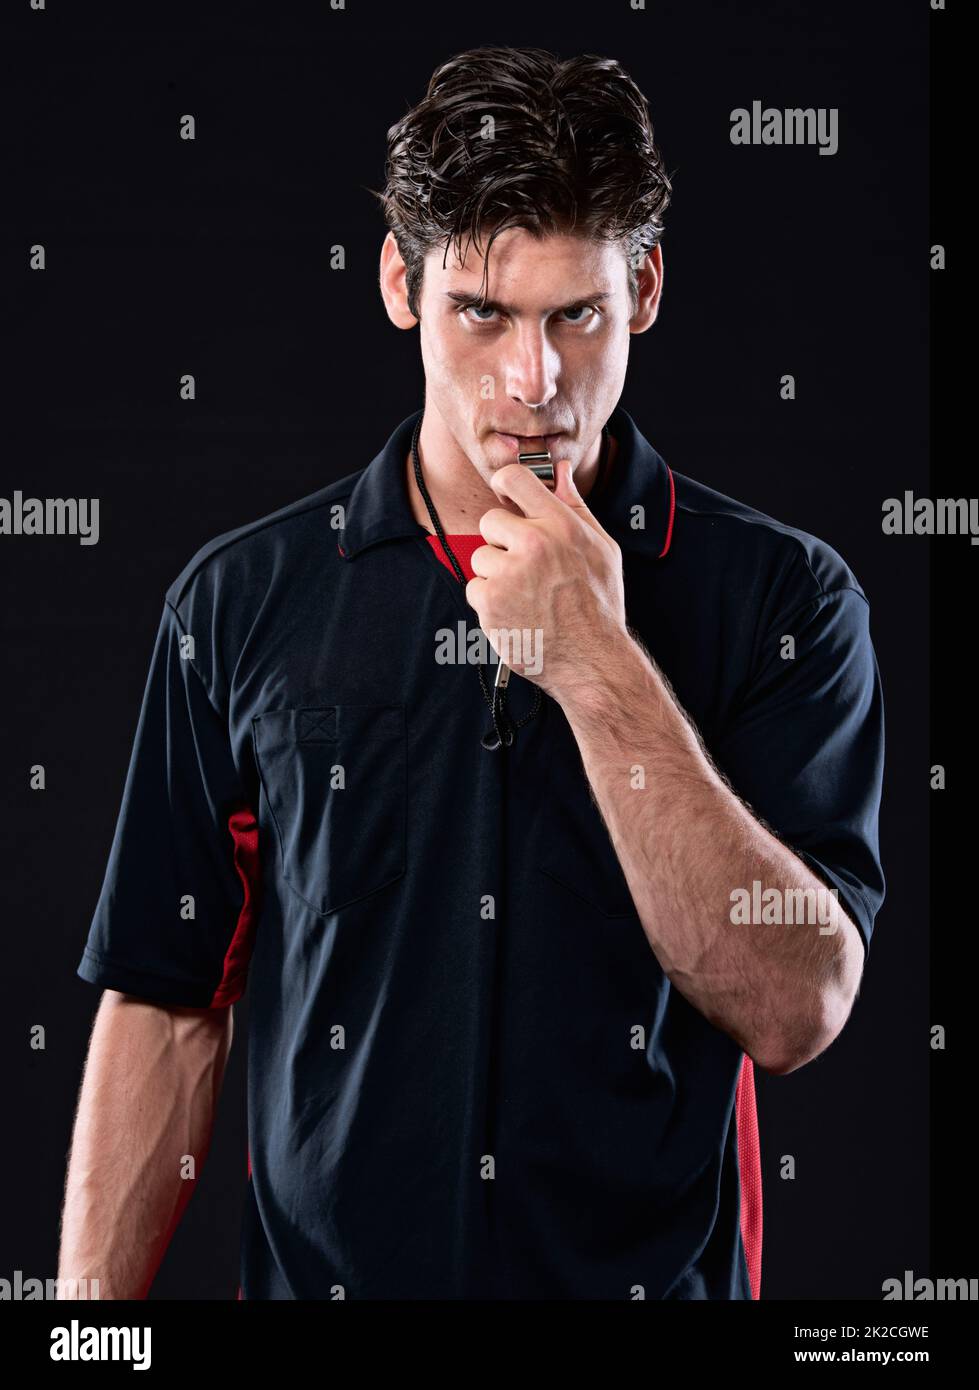 Attitude is everything. Shot of a referee blowing his whistle. Stock Photo